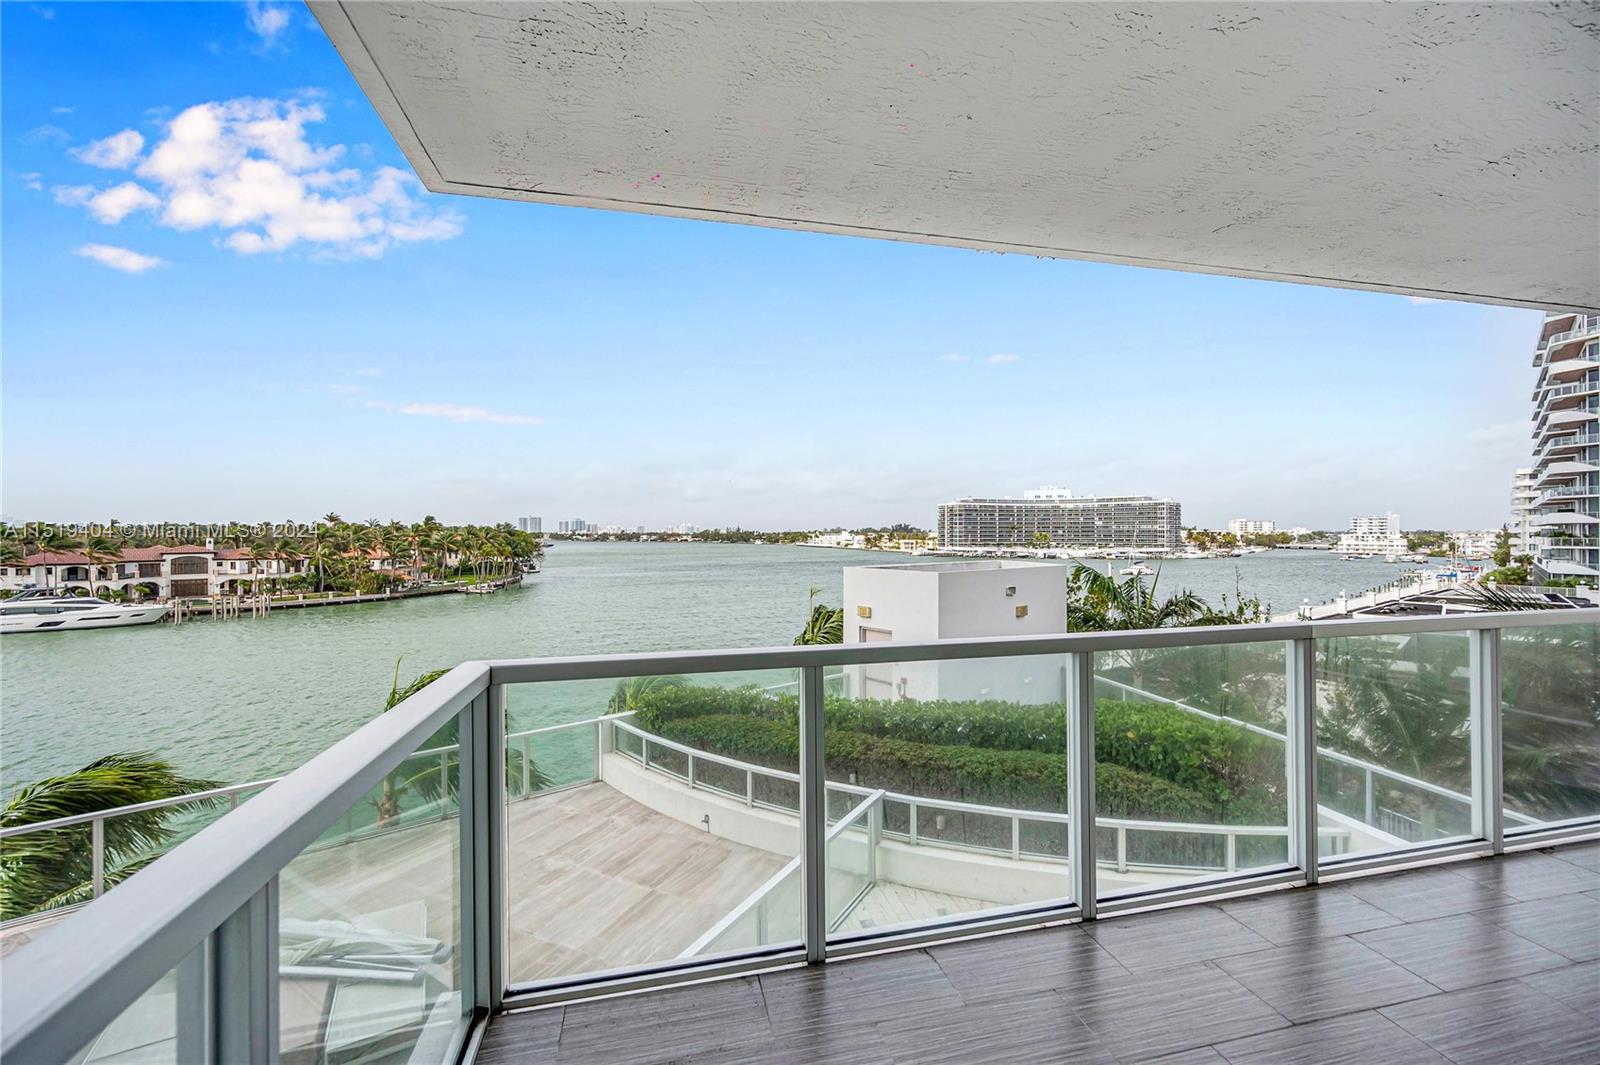 Stunning Corner Unit Overlooking the Indian Creek Waterway adjacent to the coveted Allison Island. This 3BR/3B gem located inside the boutique residence of Eden House Miami Beach offers wrap-around balcony views of both Intercoastal and Miami Beach waters. Walking distance to the Beach. Just 5 min from South Beach and the famous Lincoln Rd filled with 5 star international cuisine and a variety of Night life